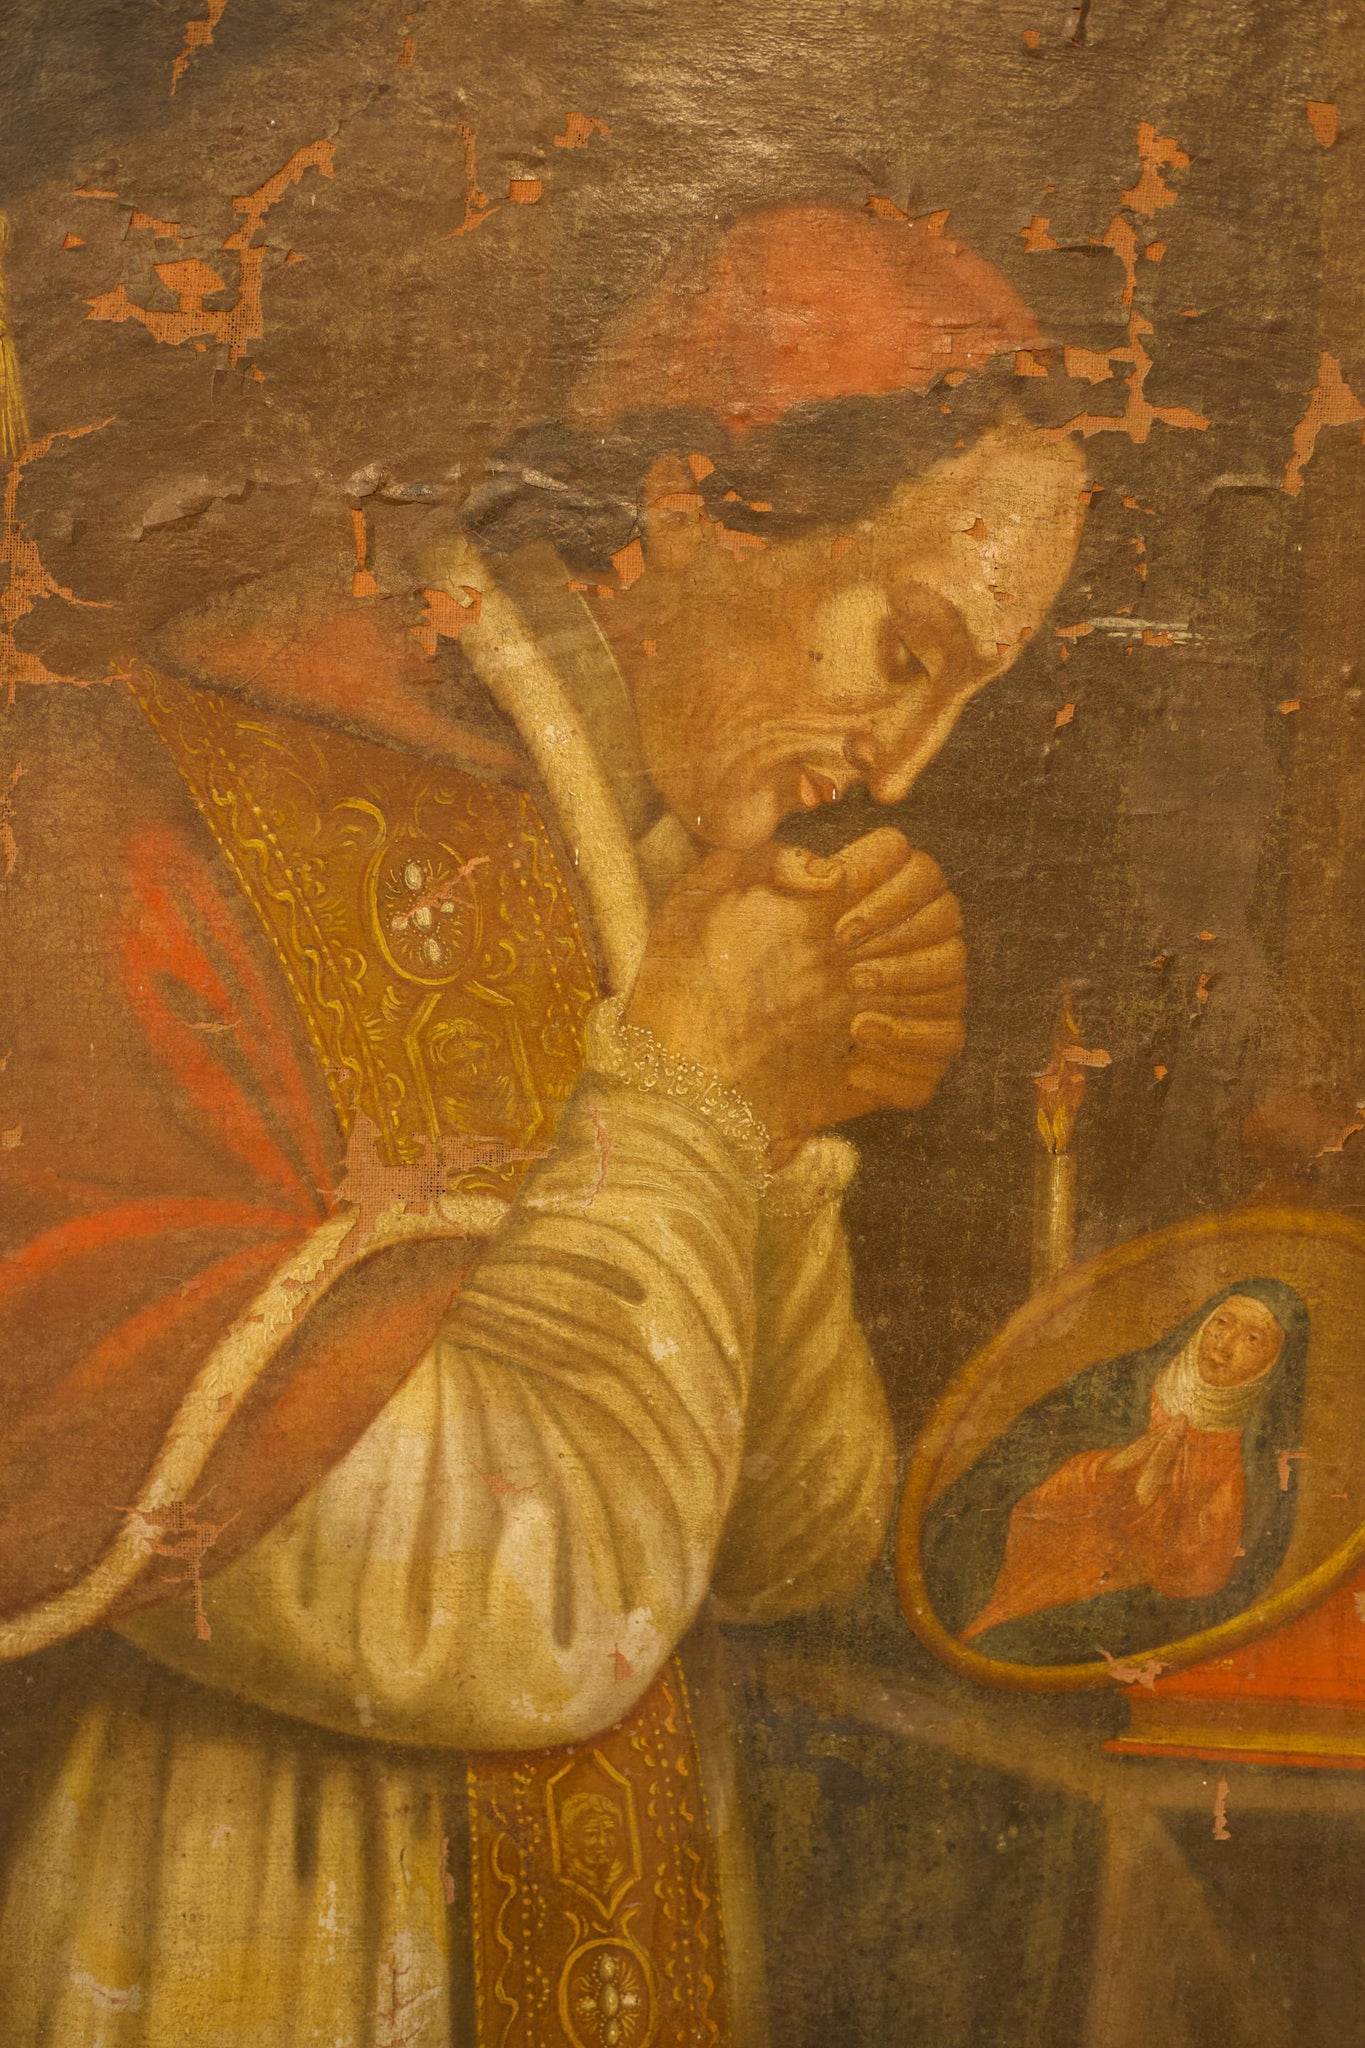 late 18th century painting of a praying Priest